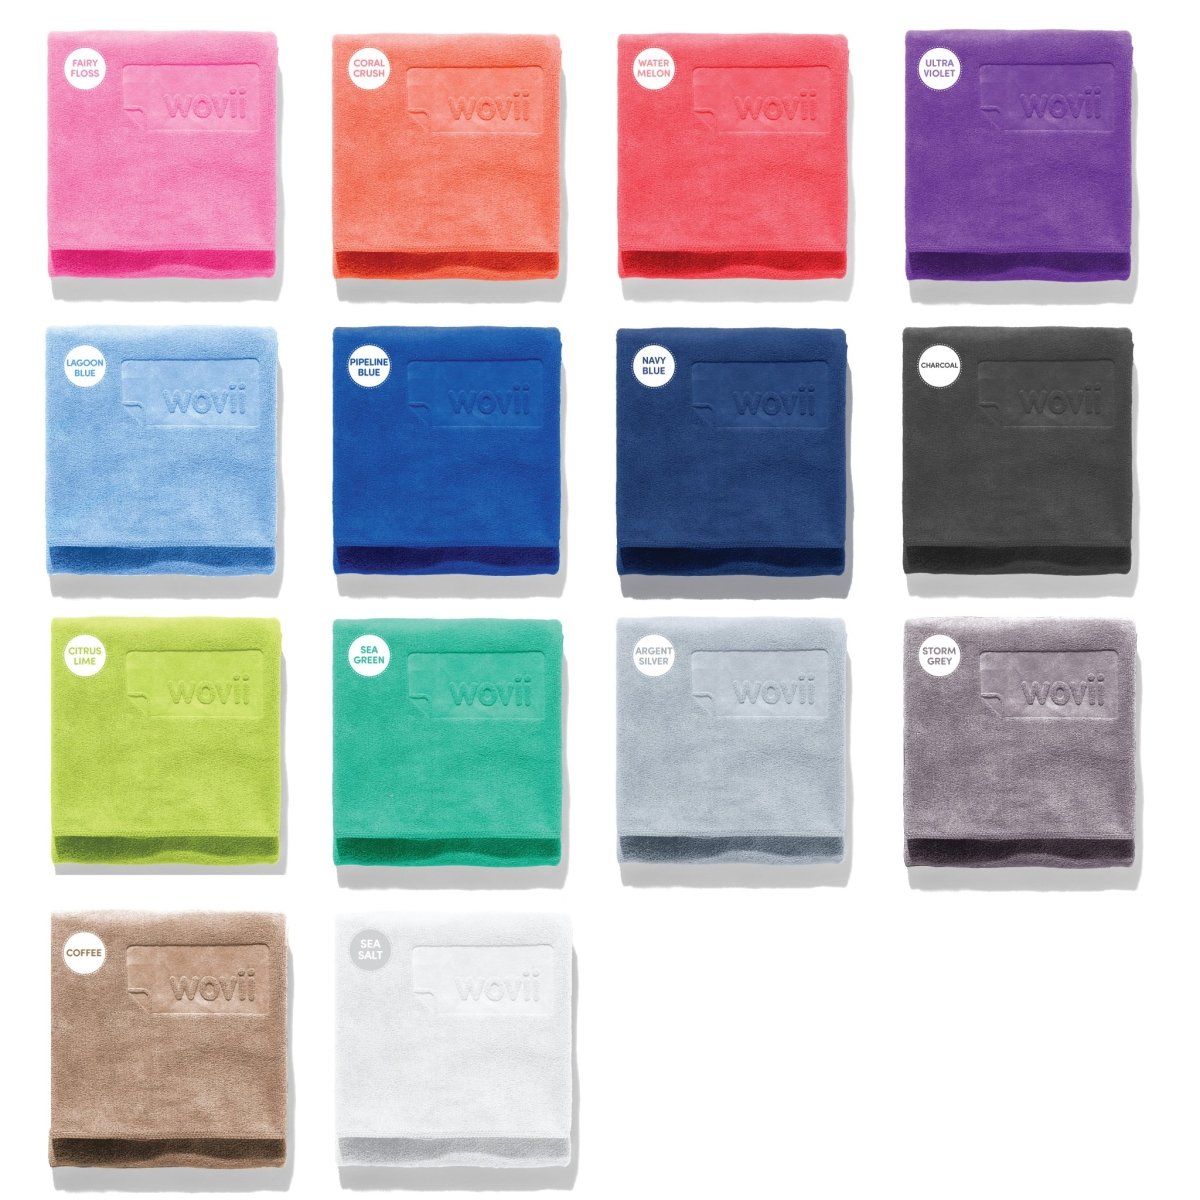 STANDARD Wovii towel - swatch of available colours